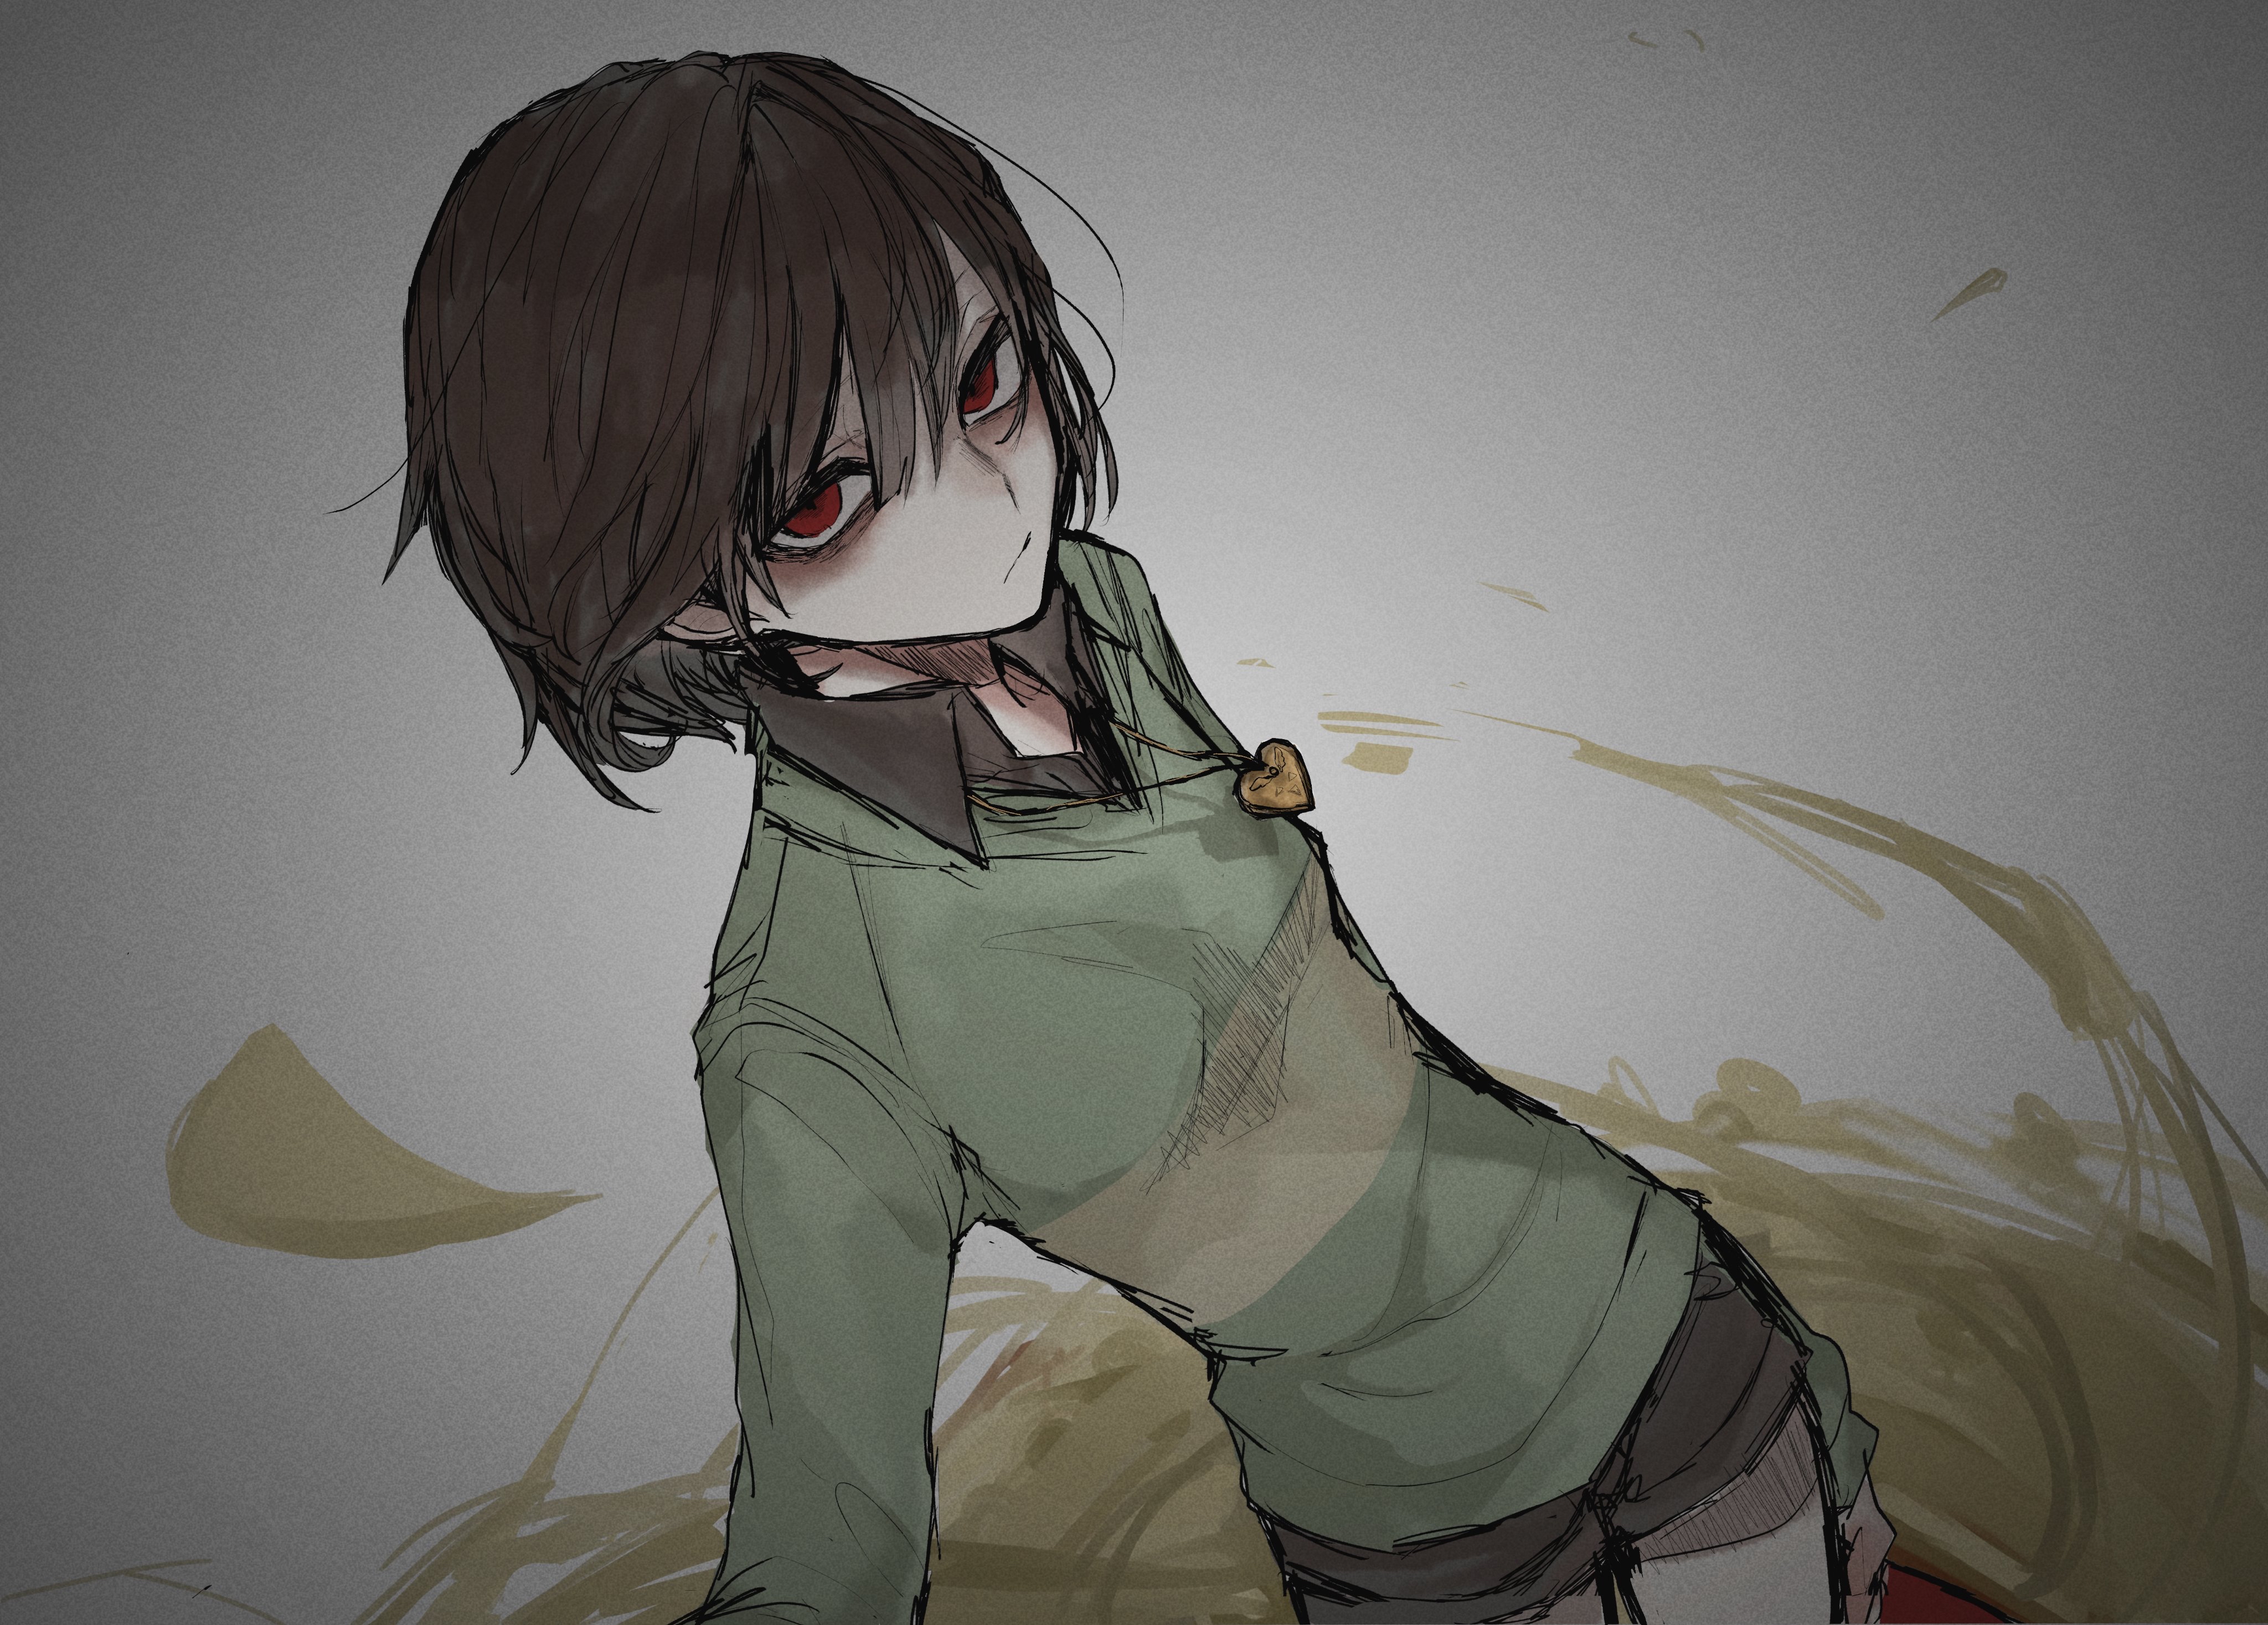 Chara (i should probably spoil this one. its a bit too bloody) : r/Undertale